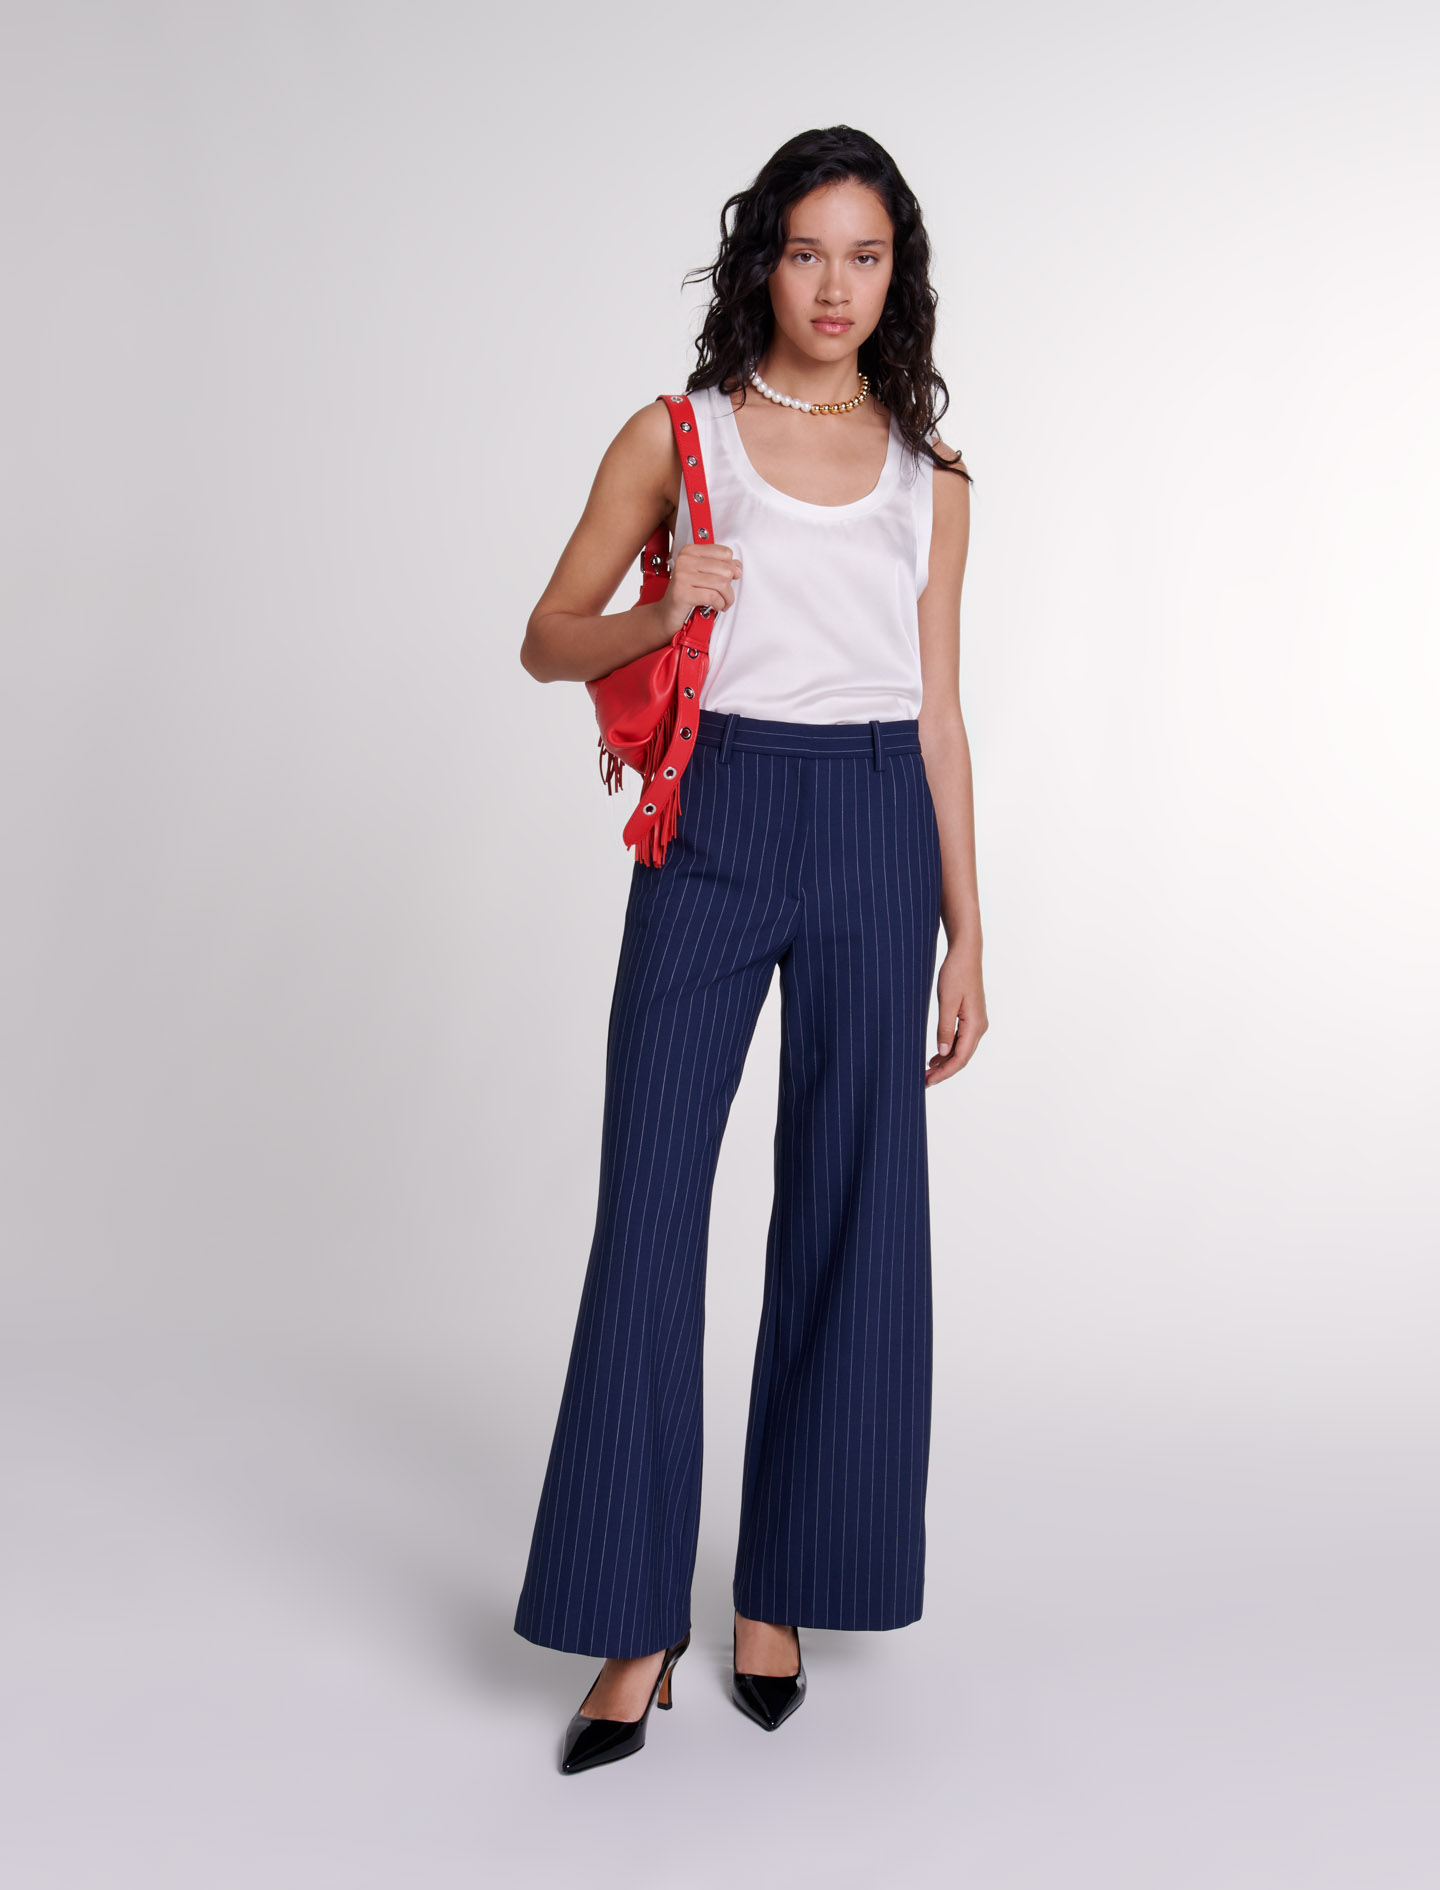 Maje Striped Trousers For Fall/winter In Navy Tennis Stripe /